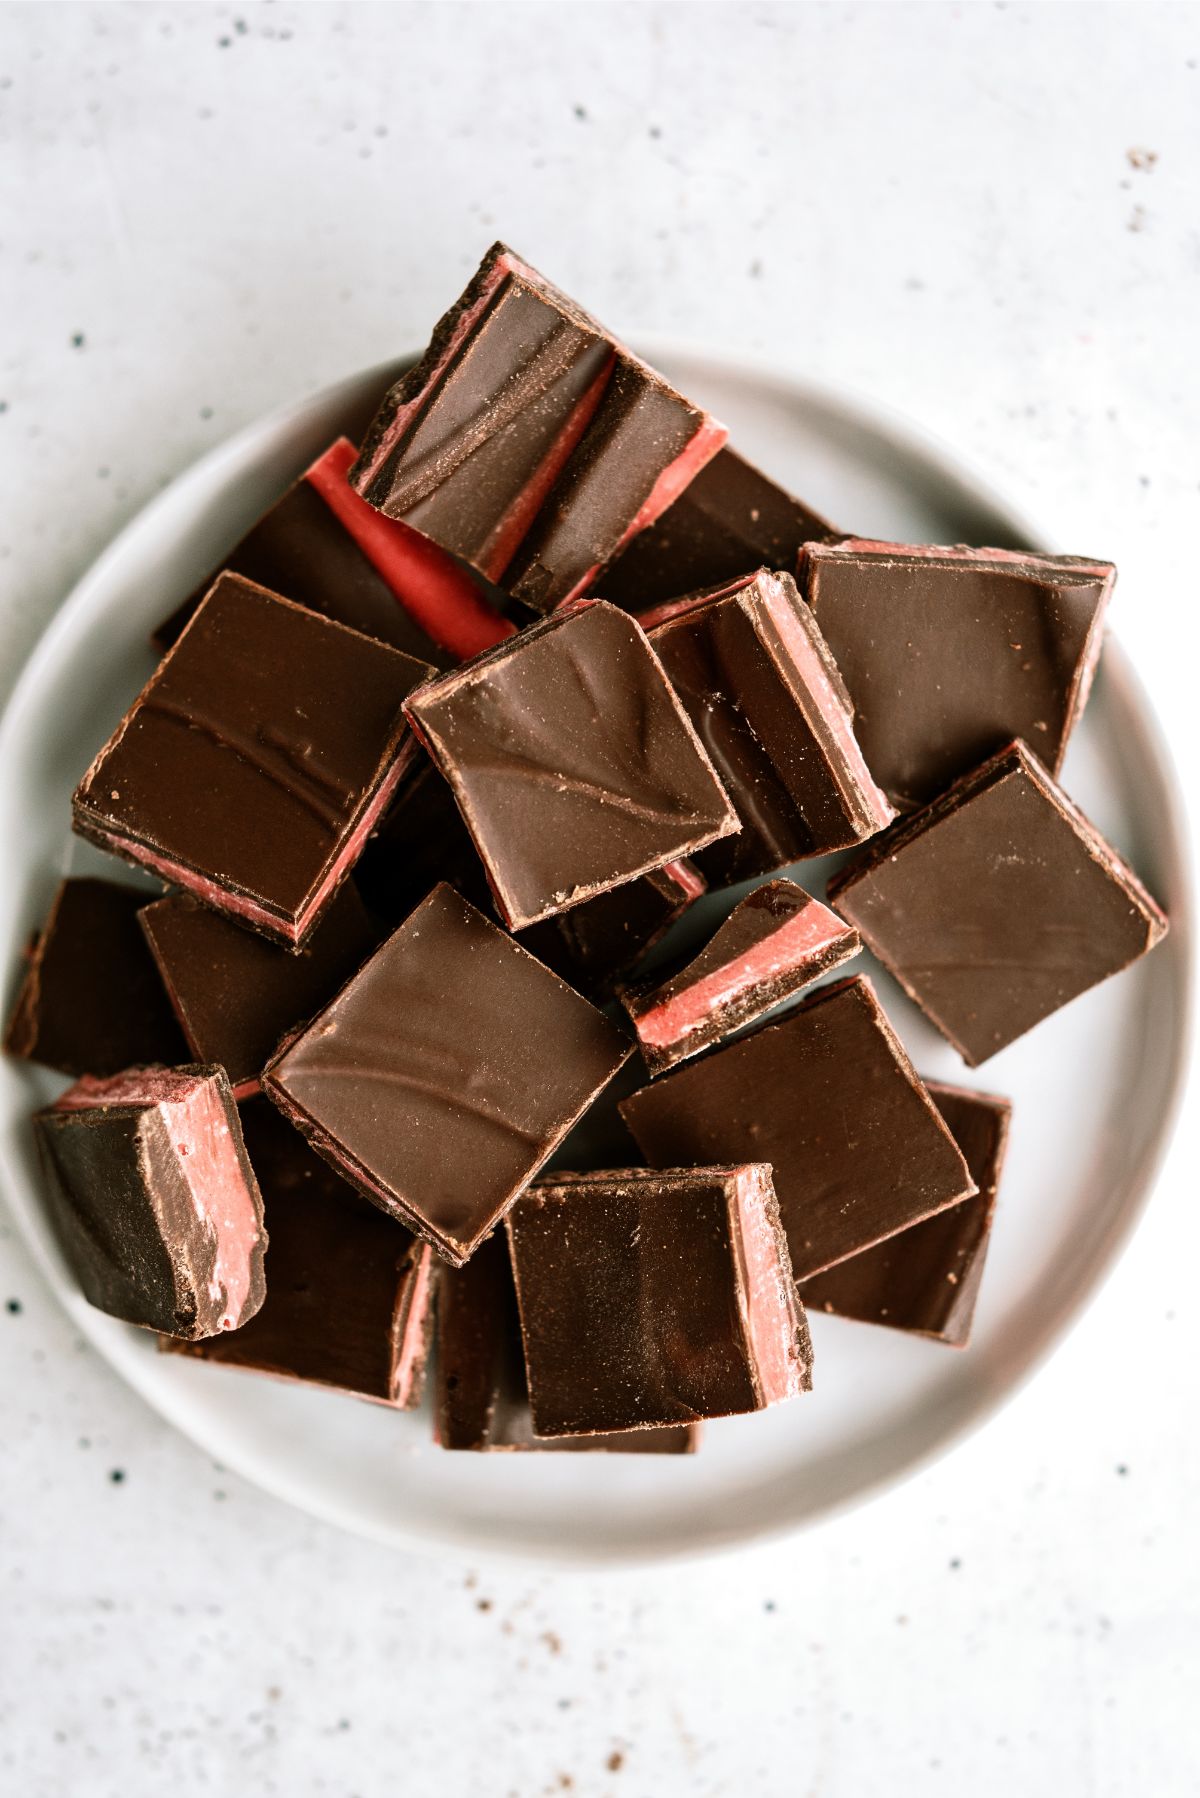 Valentine’s Thin Mints cut into squares on a plate